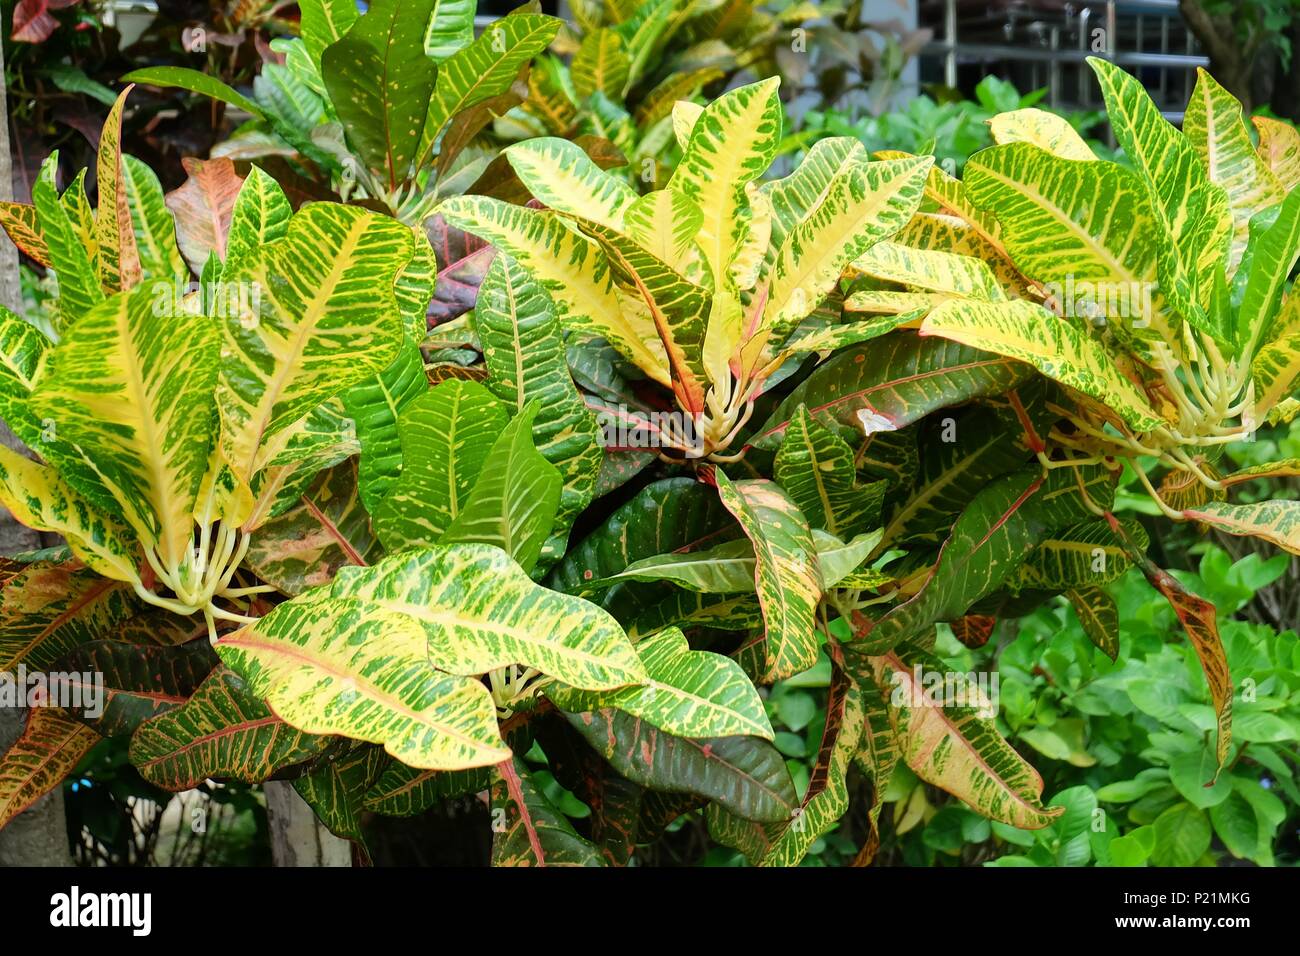 Flower and Plant, Beautiful Green and Yellow Spot Croton Plants or Codiaeum Variegatium Plants For Garden Decor. Stock Photo